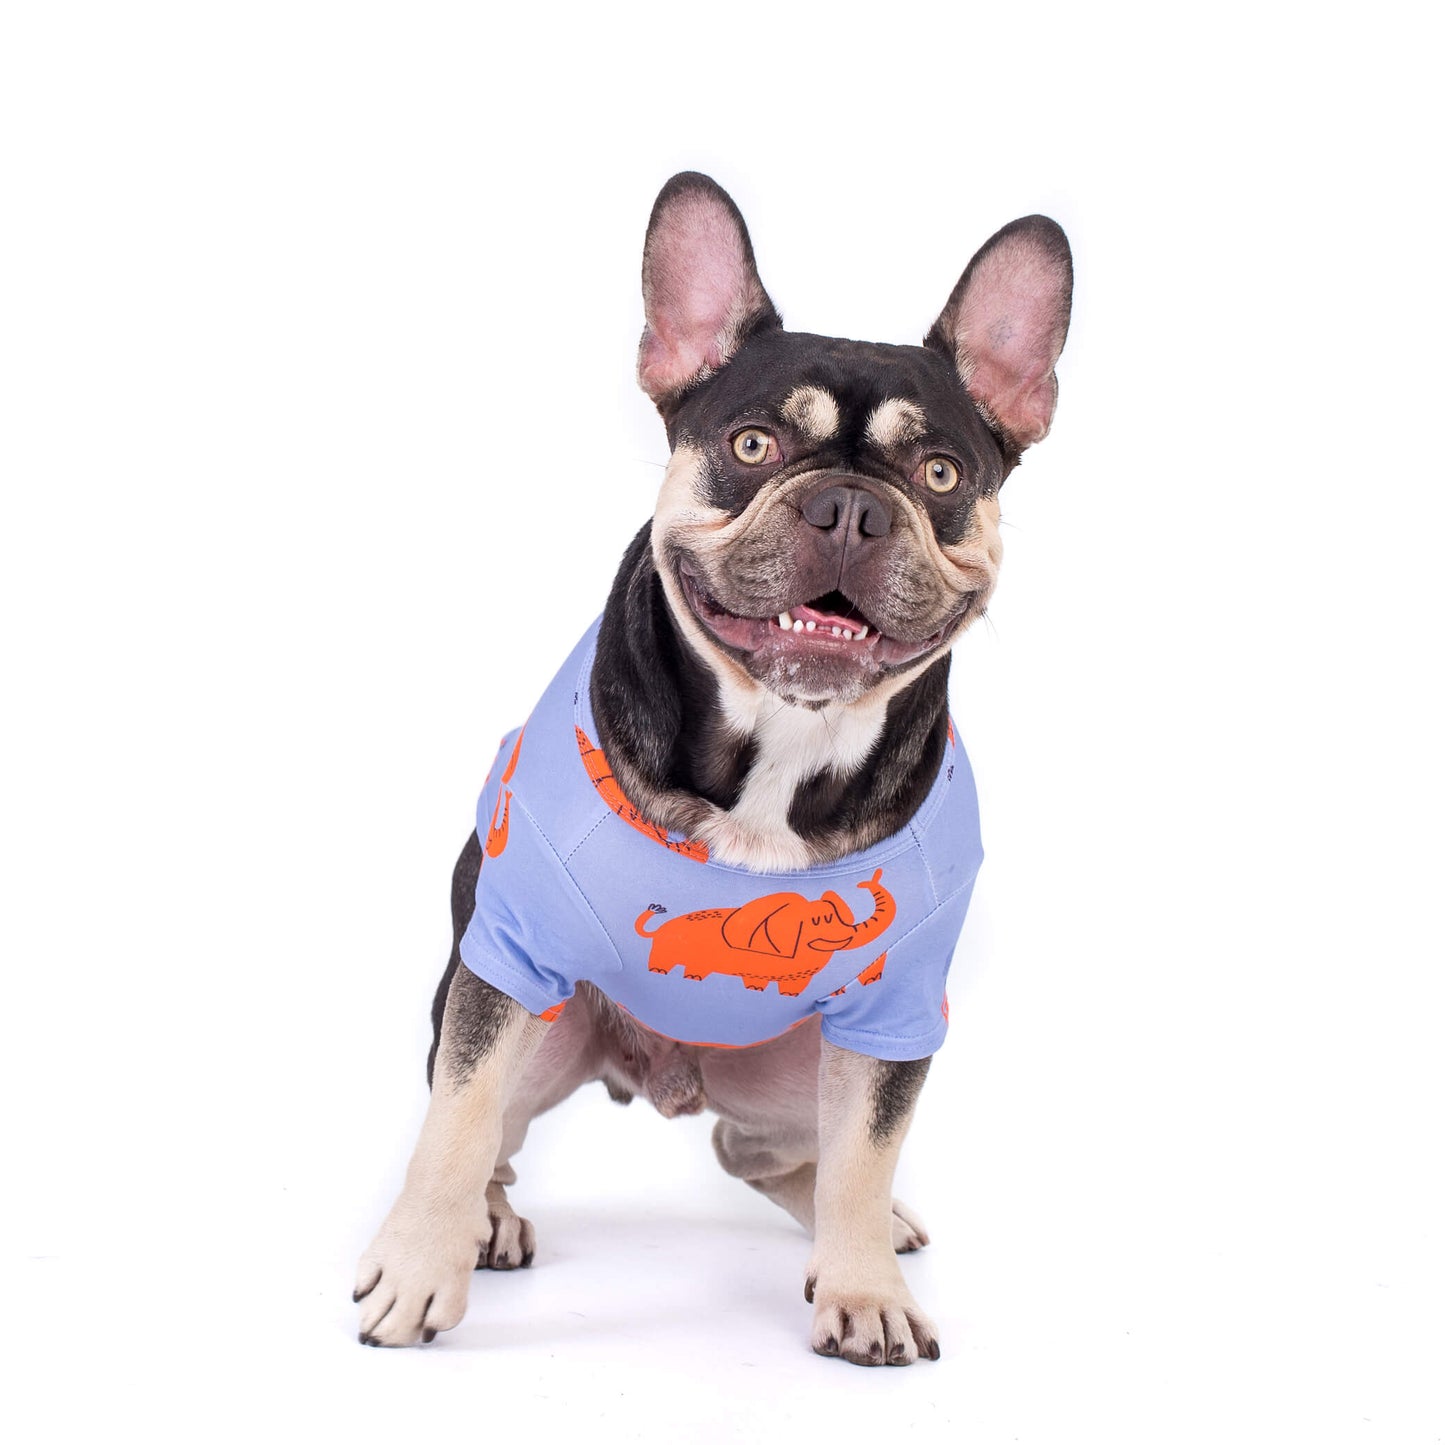 Fergus the chocolate and tan French Bulldog wearing a lilac shirt with orange elepghants printed on it. The shirt is called Electric Elephant by Vibrant Hound.